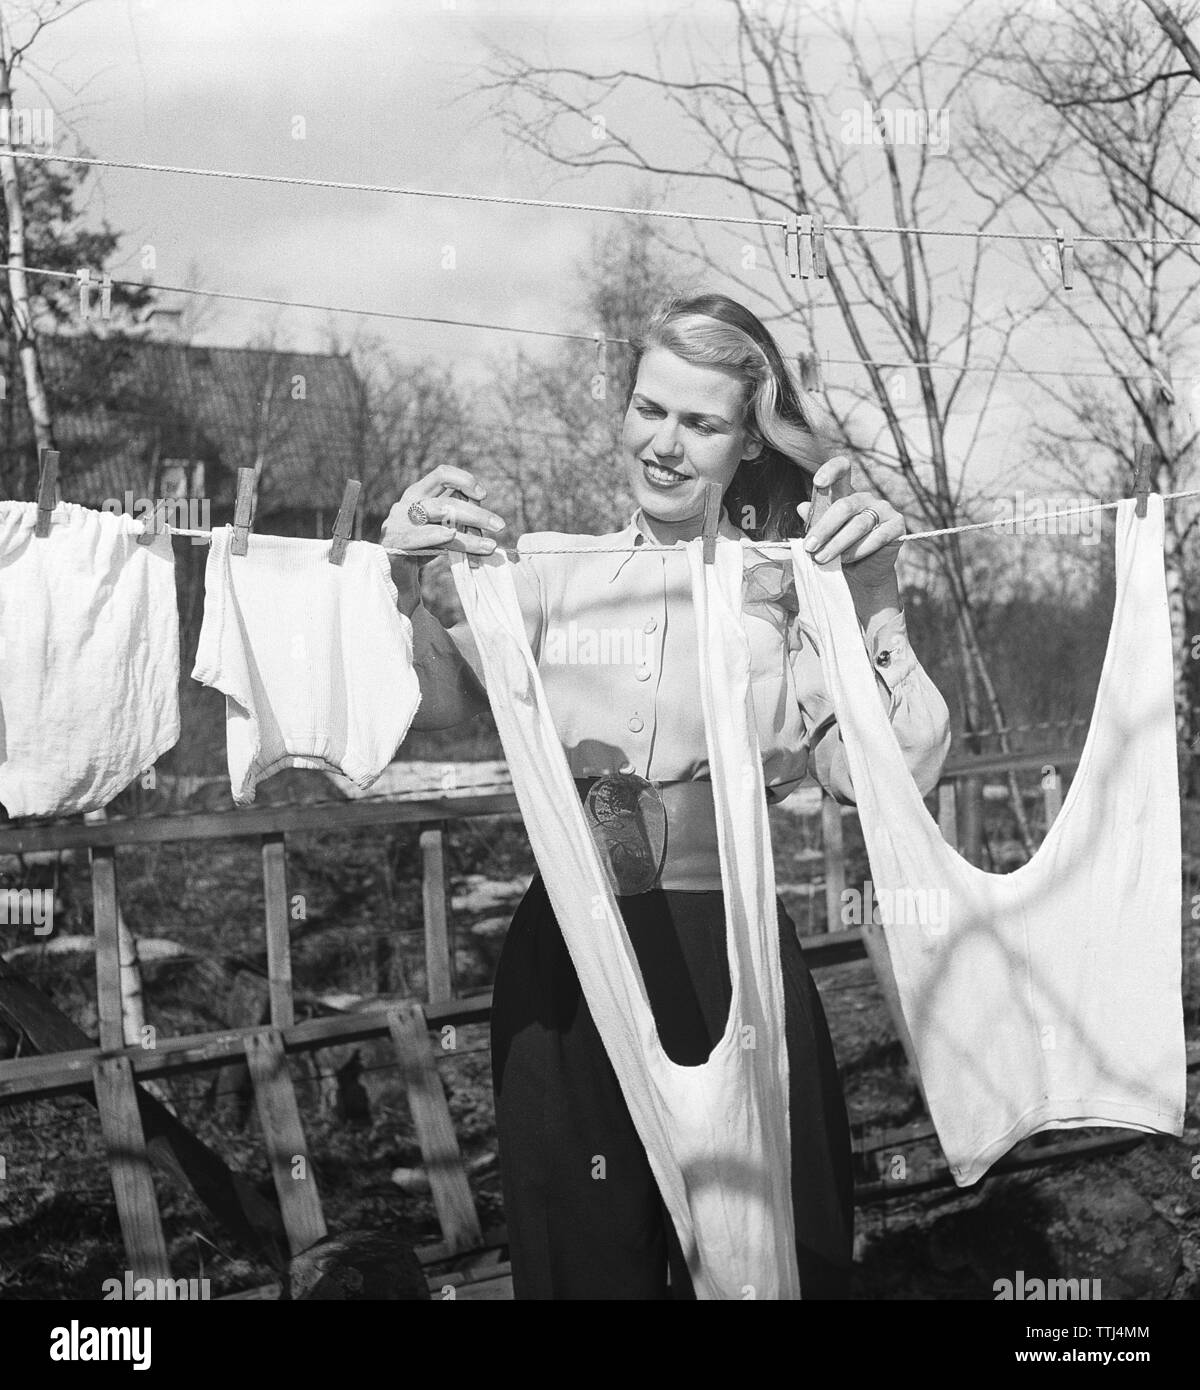 Doing the laundry in the 1940s. A lady is out in the garden hanging up the laundry to dry. Sweden 1947 Kristoffersson ref AB10-5. Sweden 1951 Stock Photo